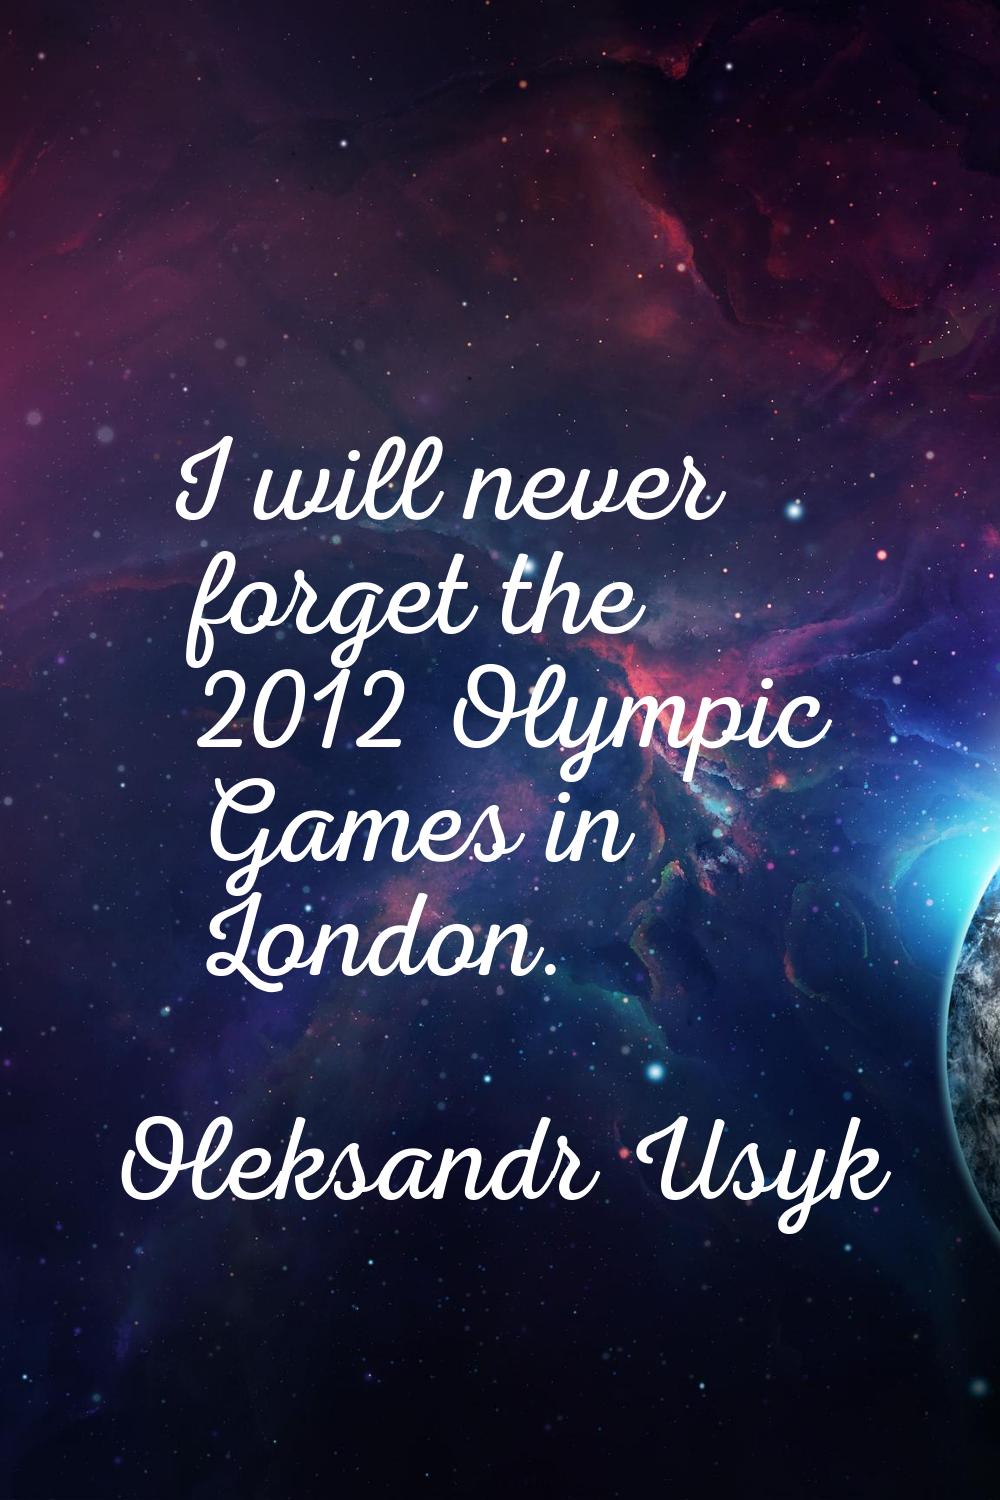 I will never forget the 2012 Olympic Games in London.